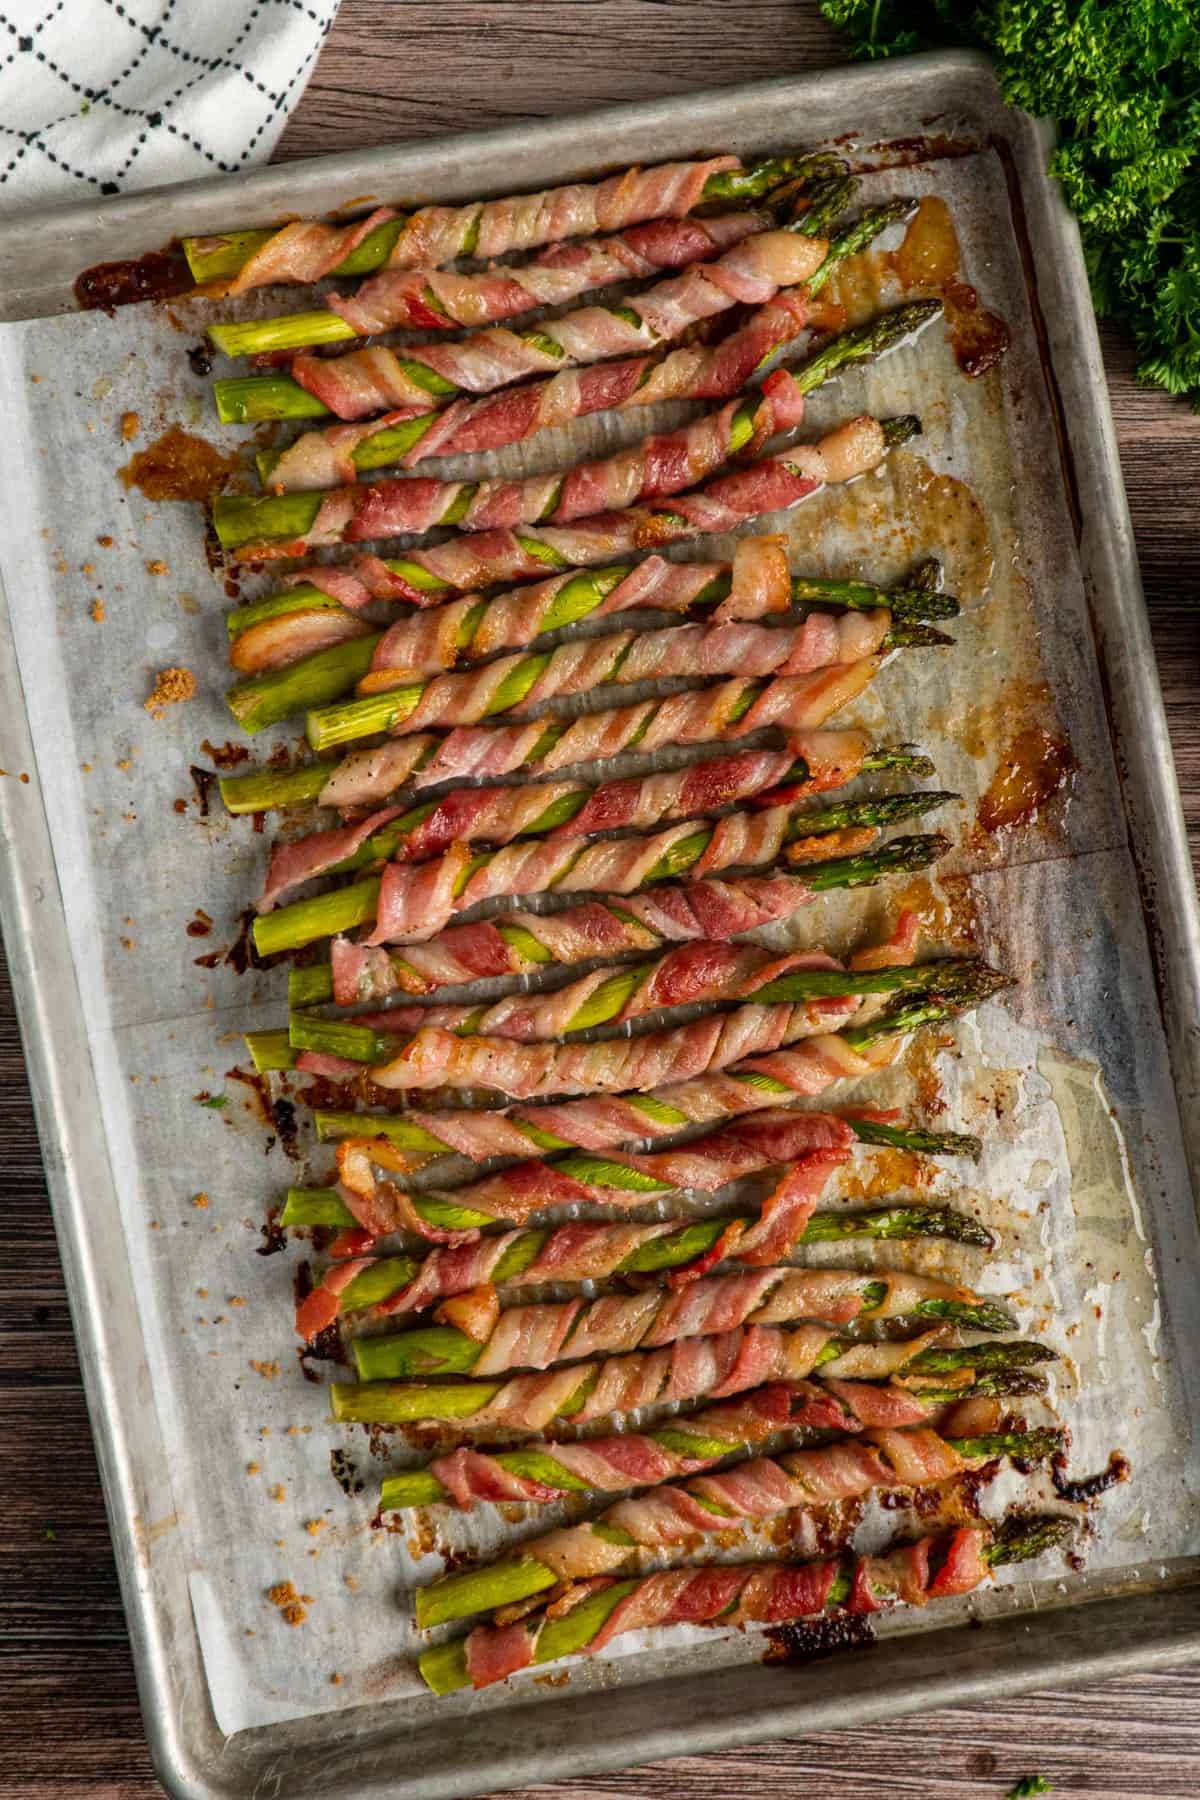 Bacon wrapped asparagus on a baking sheet.